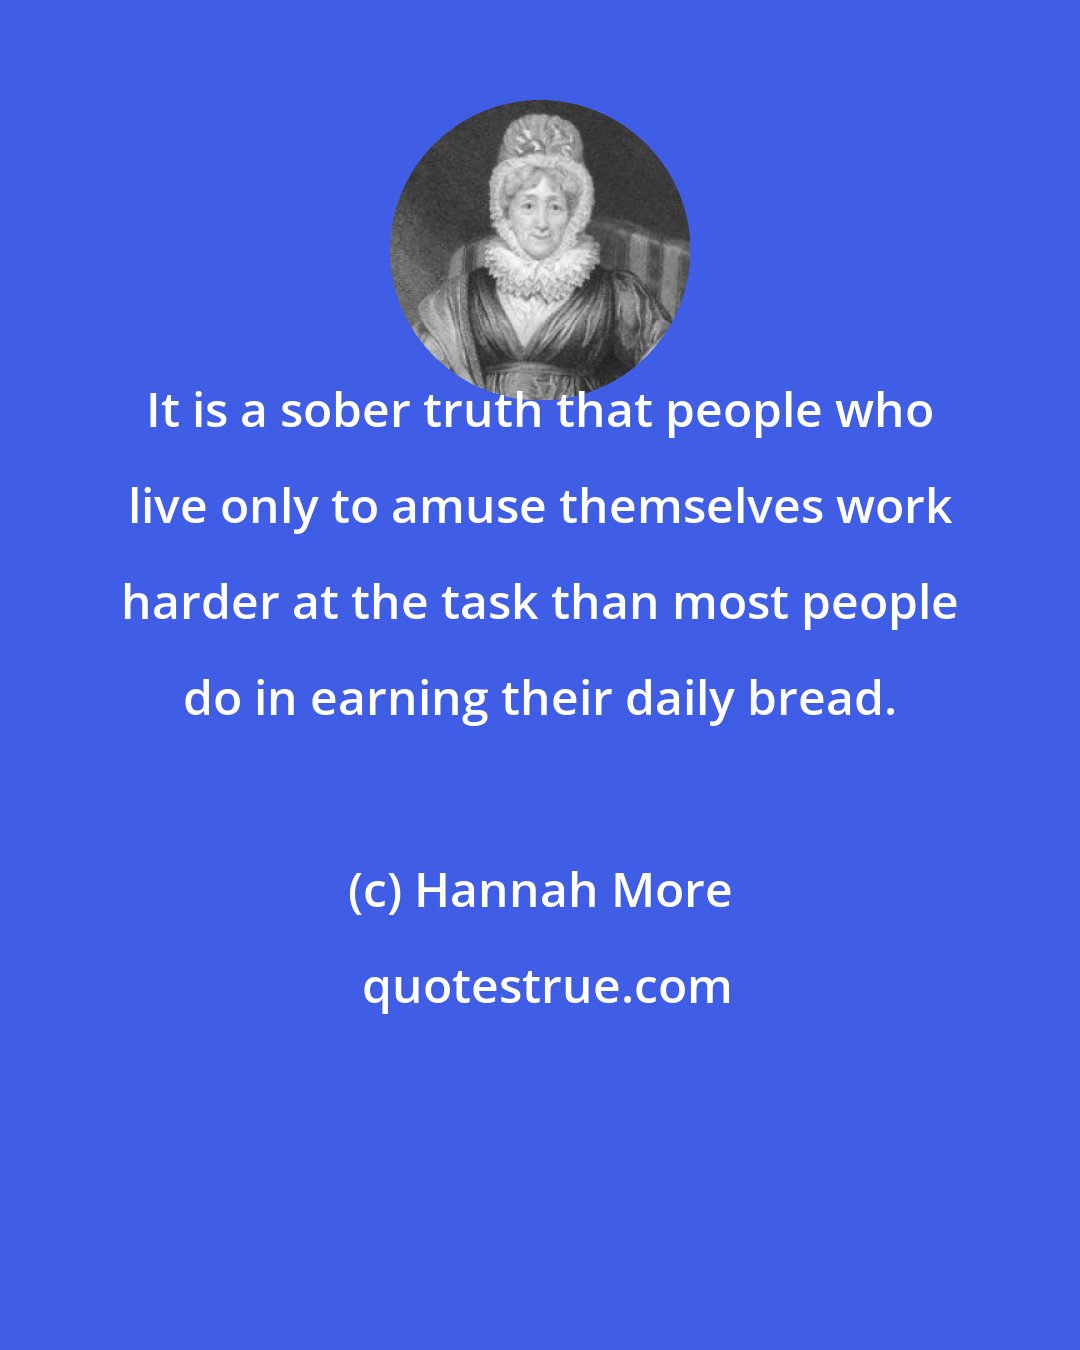 Hannah More: It is a sober truth that people who live only to amuse themselves work harder at the task than most people do in earning their daily bread.